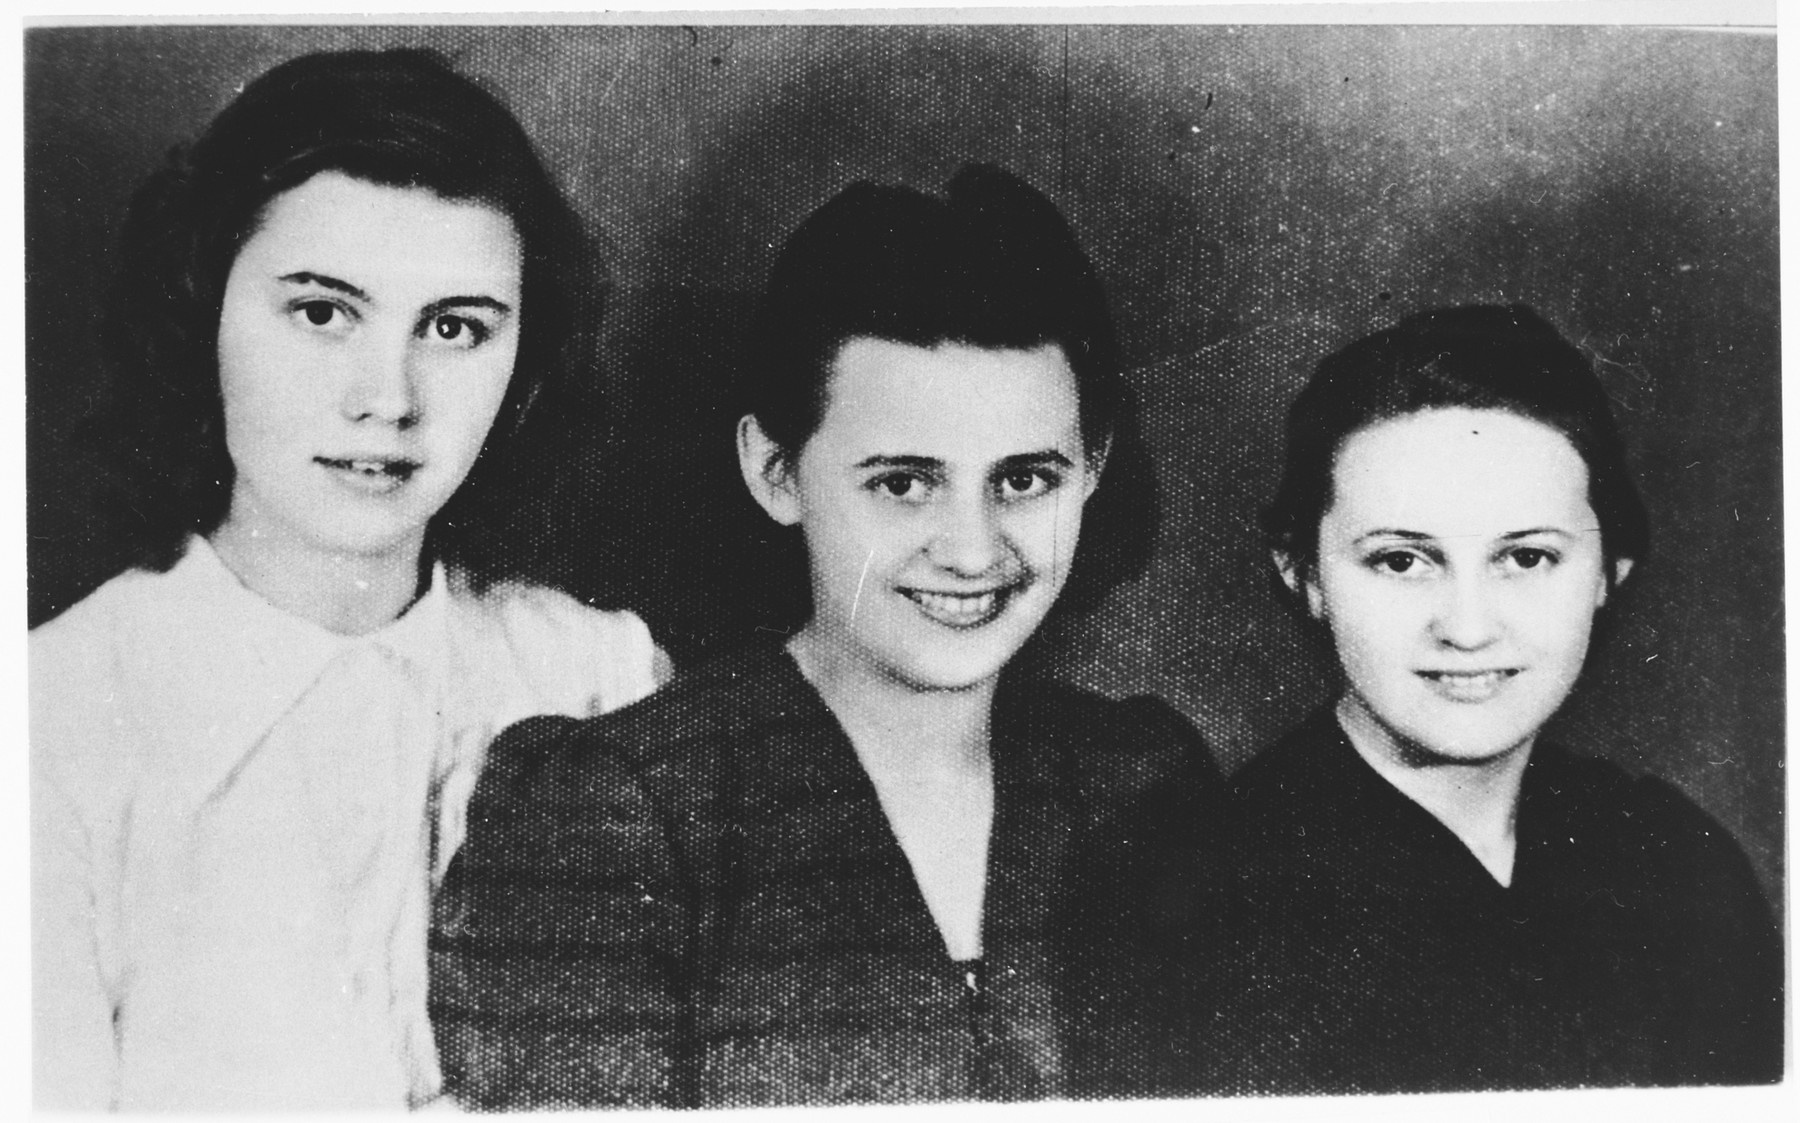 Studio portrait of the Ditrik sisters from Zenica, Bosnia, [possibly members of the Yugoslav resistance] who were deported to Jasenovac on December 16, 1944.  

Pictured from left to right are: Borka (18), Angelina (20), and Miroslava (16).  They were killed in Ustice, where the Una River meets the Sava River.